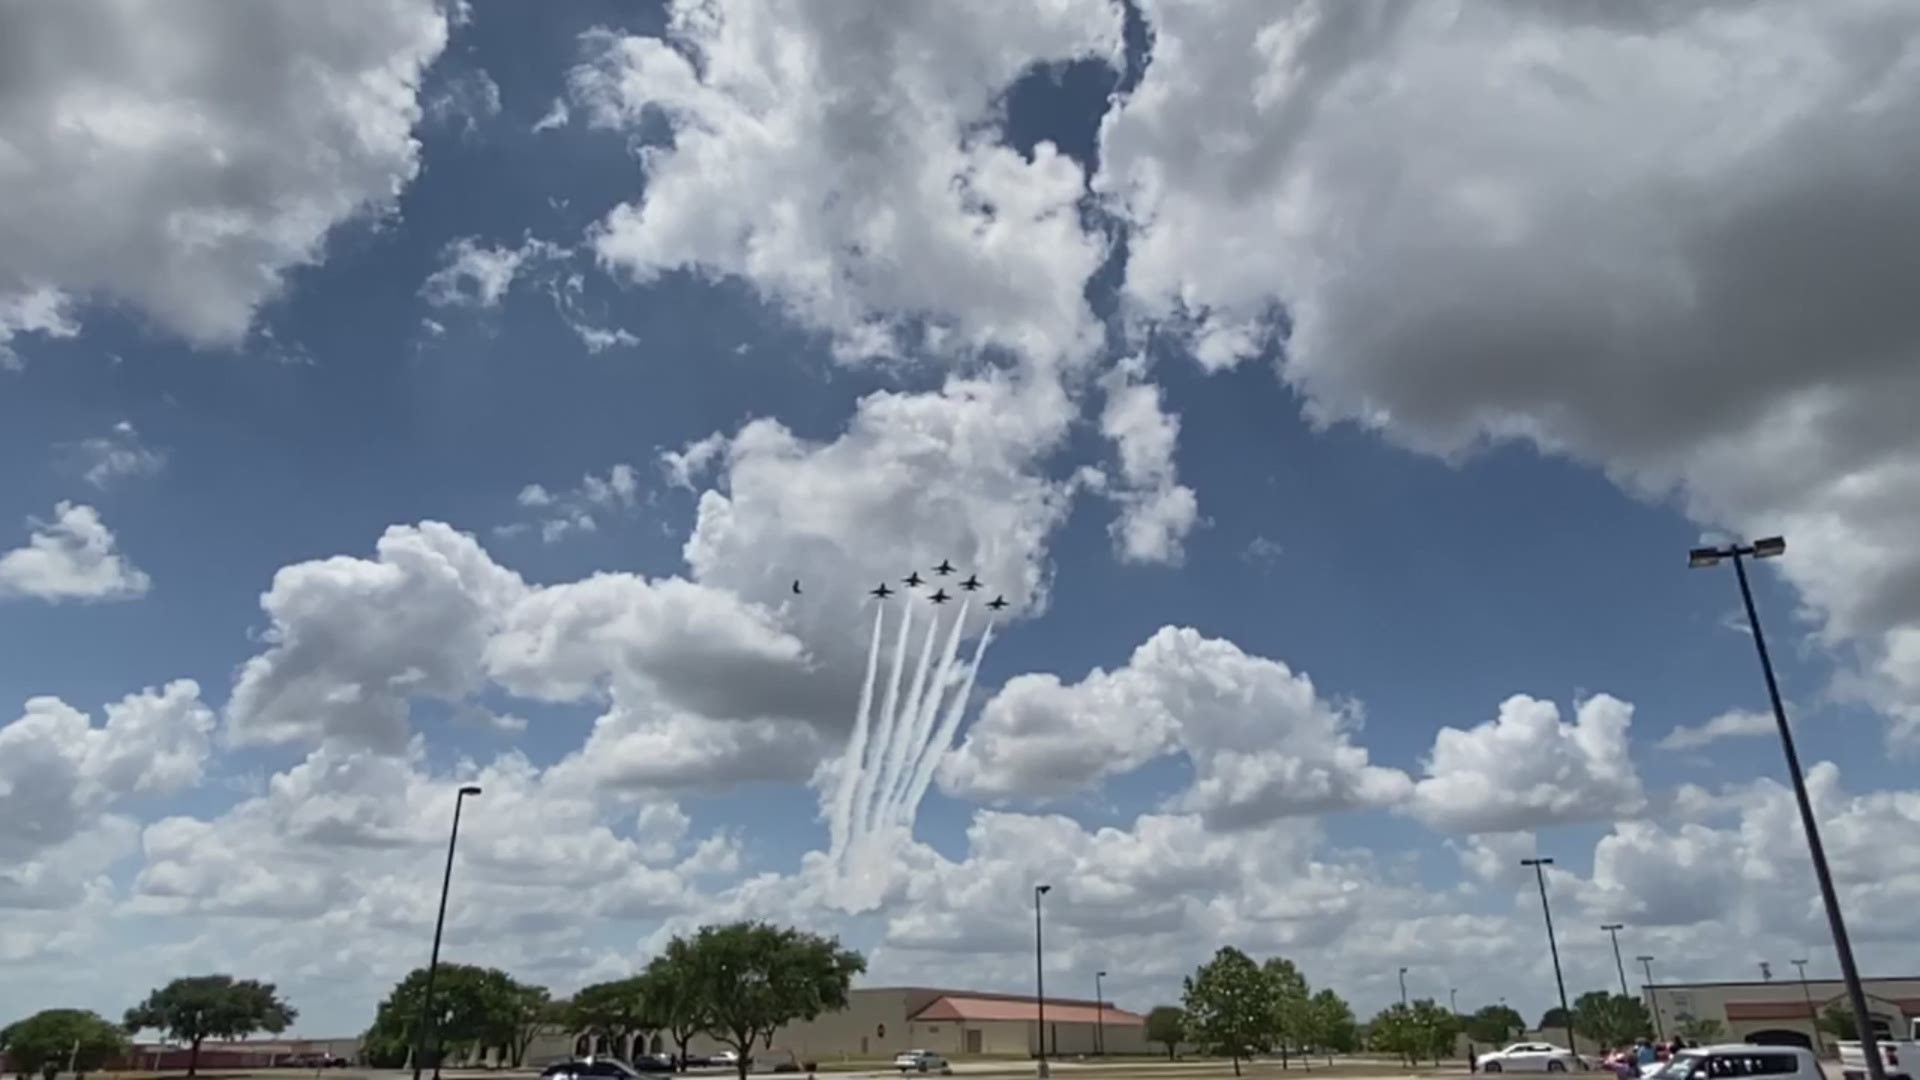 The U.S. Air Force's air demonstration squadron visited the Alamo City to salute frontline healthcare workers on Wednesday afternoon.